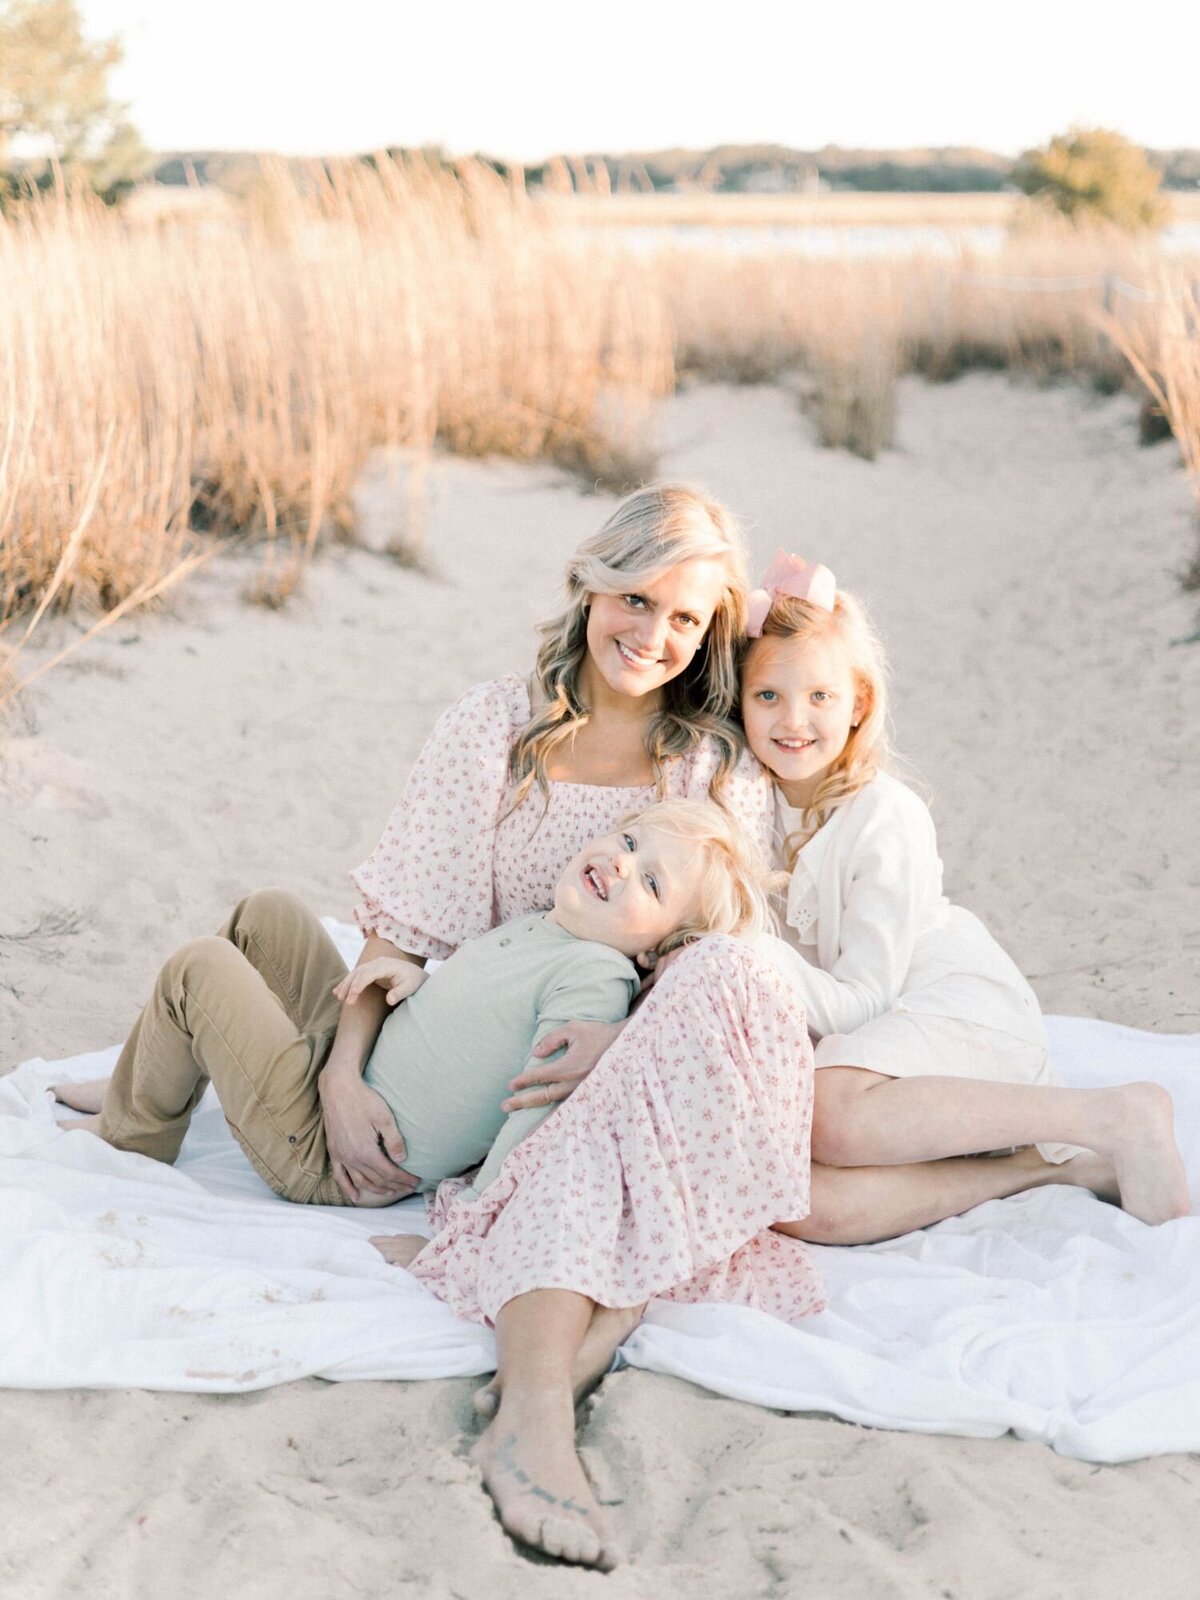 Mother sits on beach blanket smiling with two children Richmond Family Photography session.